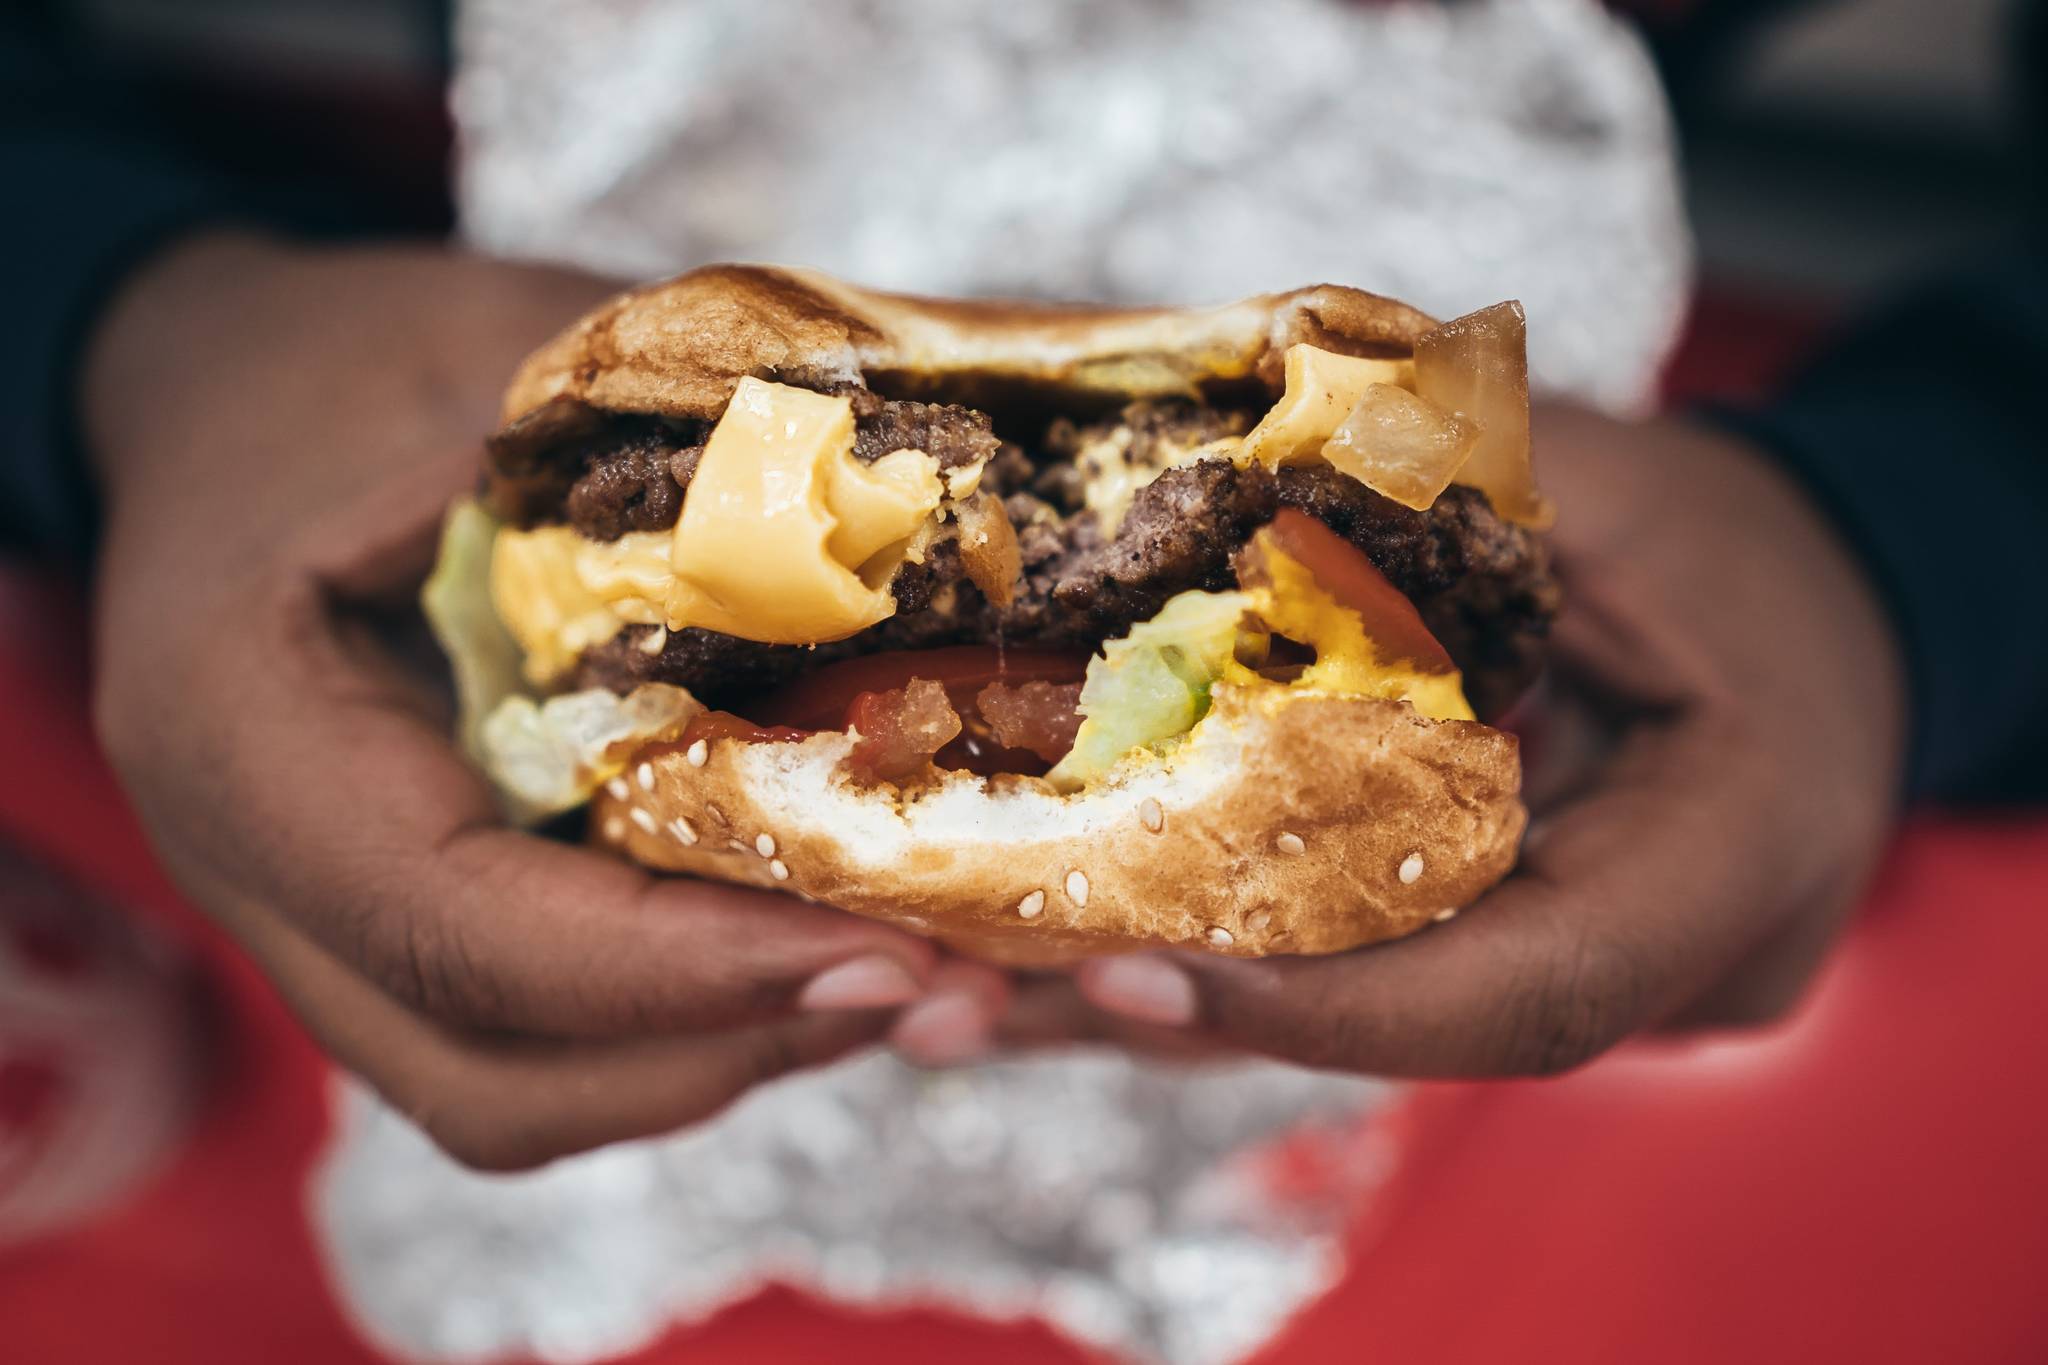 Impossible Whopper helps normalize plant-based diets